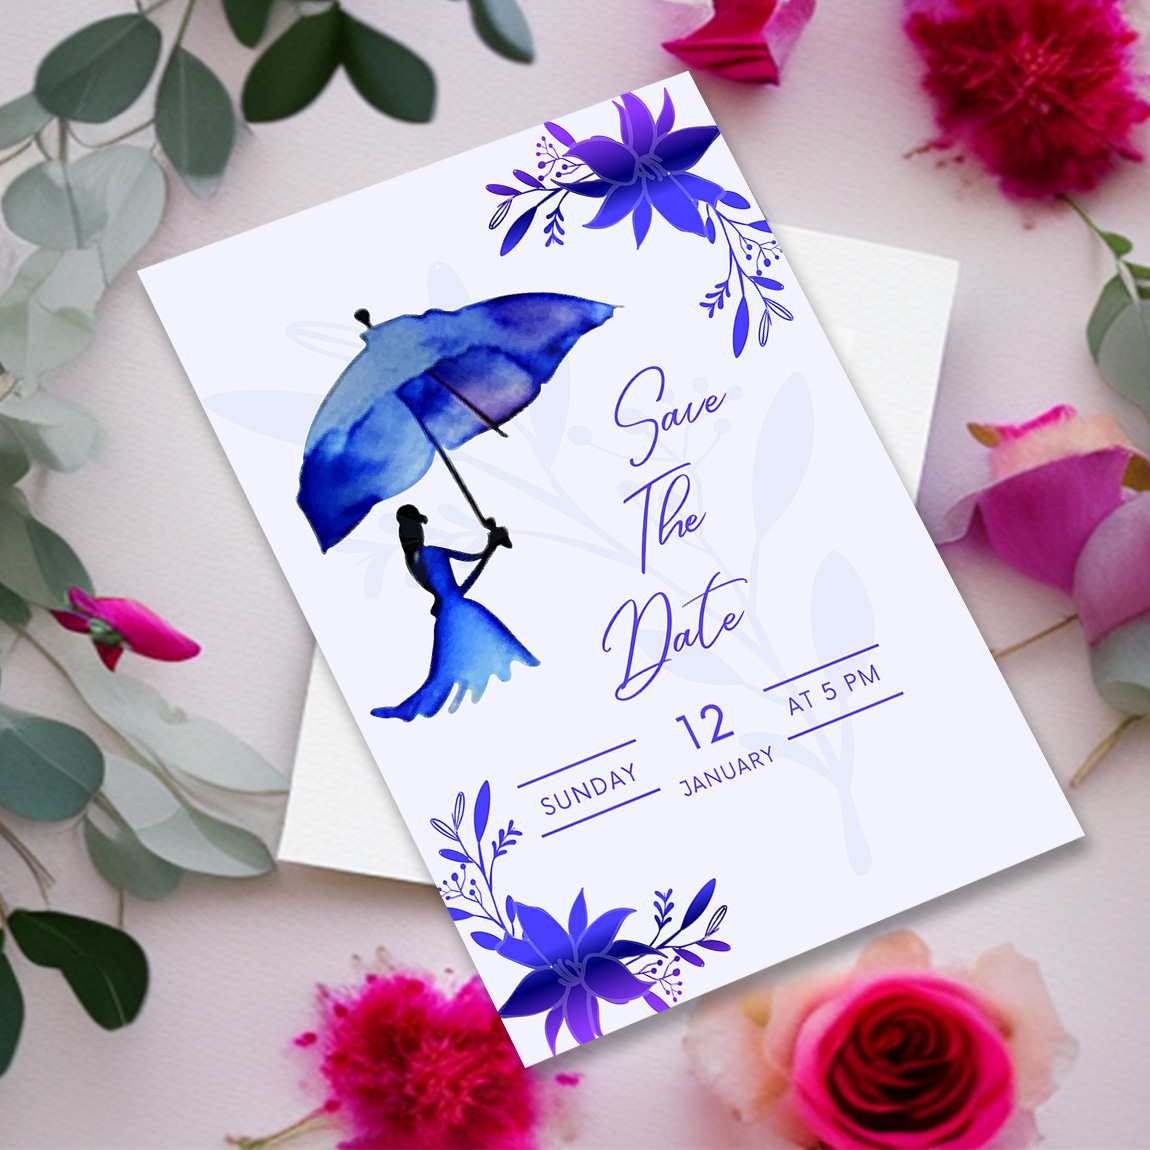 Image with wonderful wedding invitation card with flowers in blue.